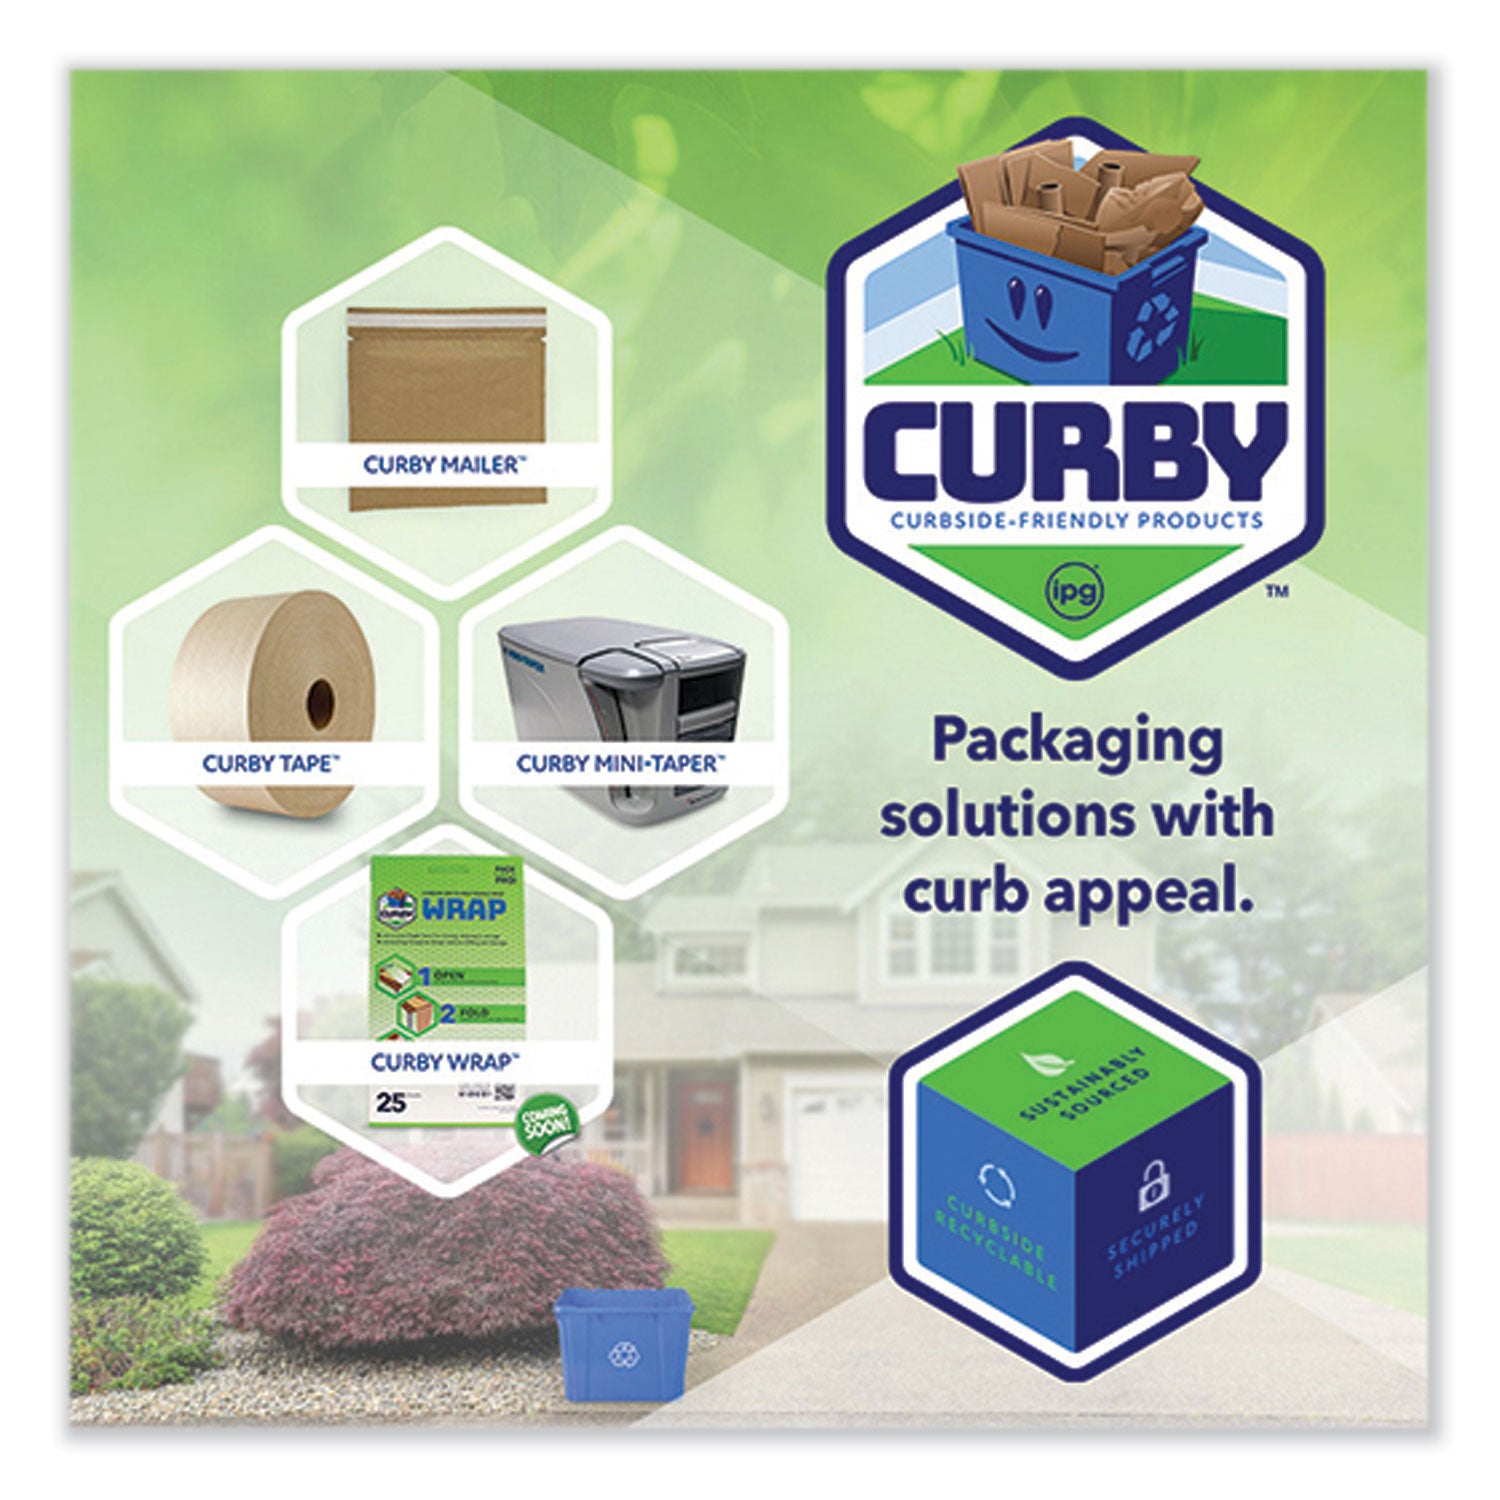 curby-mailer-self-sealing-recyclable-mailer-paper-padding-self-adhesive-#5-1138-x-155-30-carton_ipgcbml5c - 3